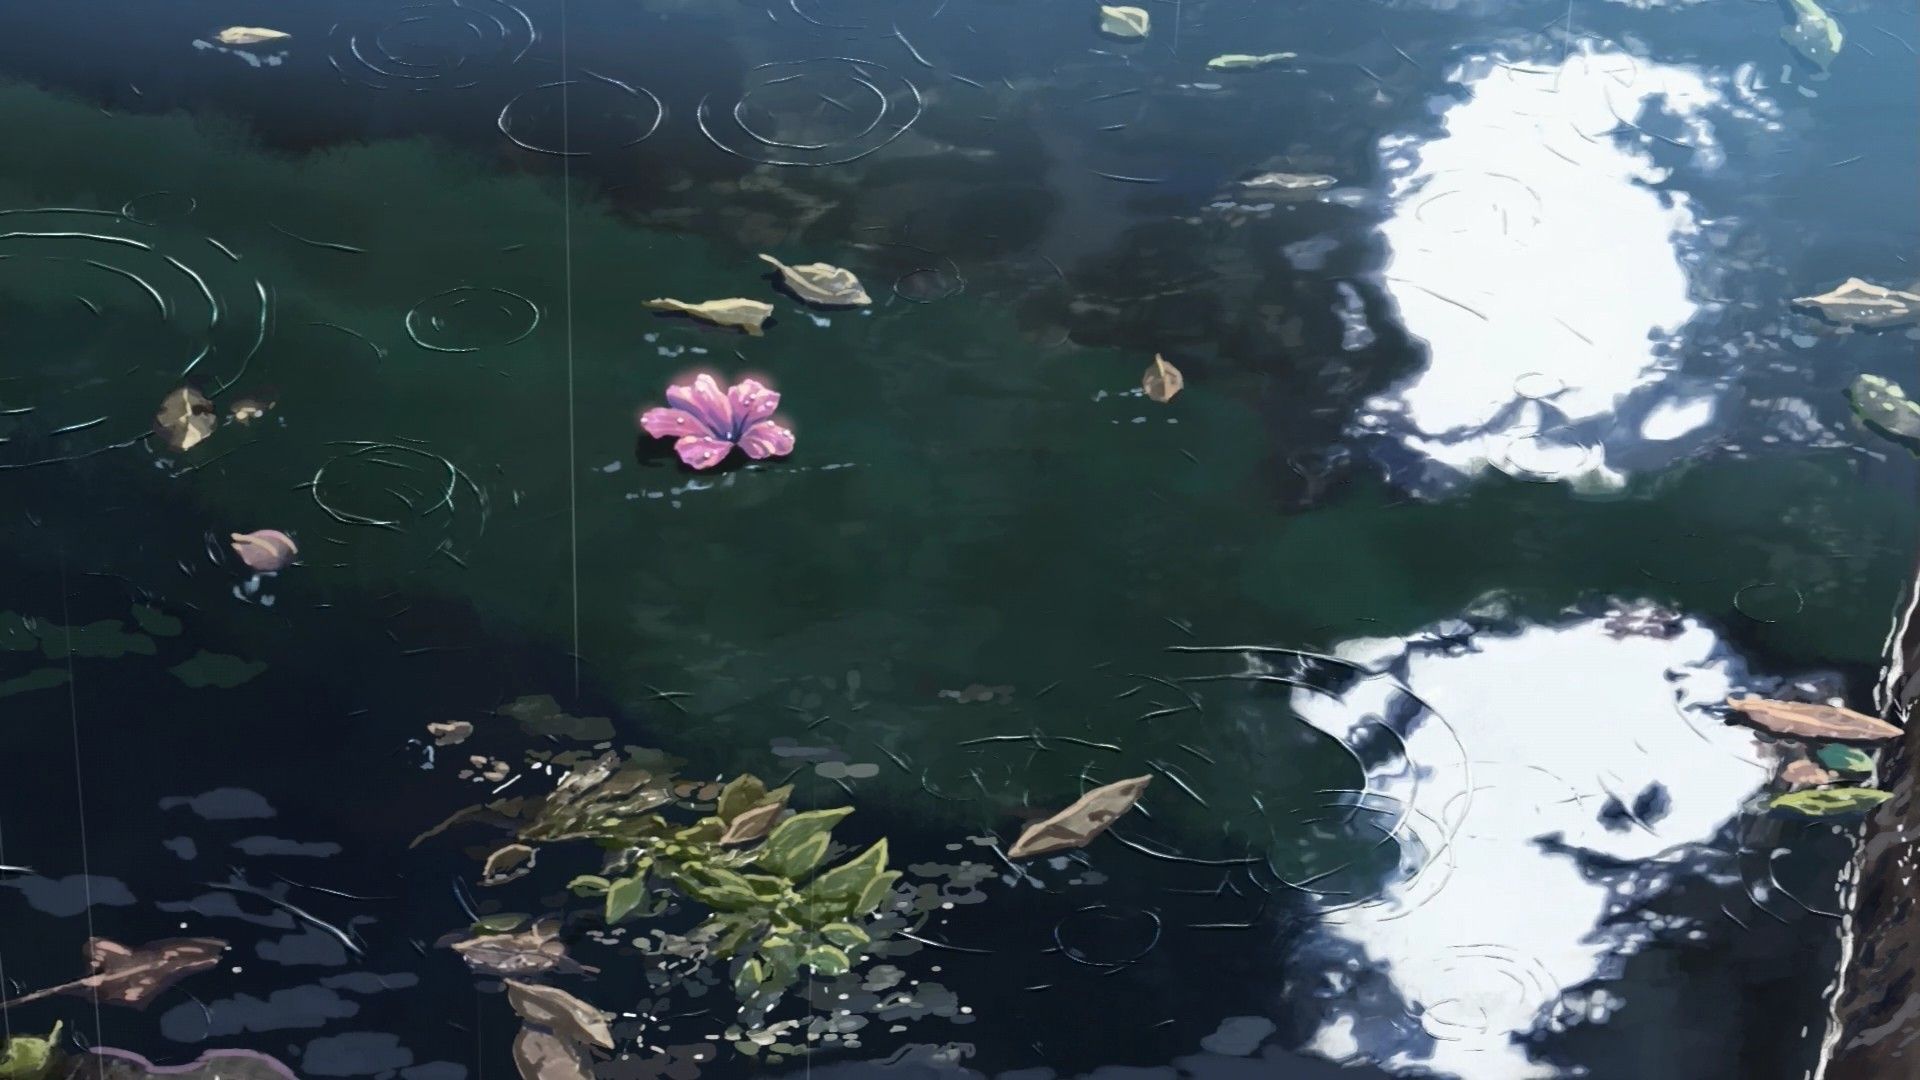 A pond with leaves and flowers floating on top - Garden